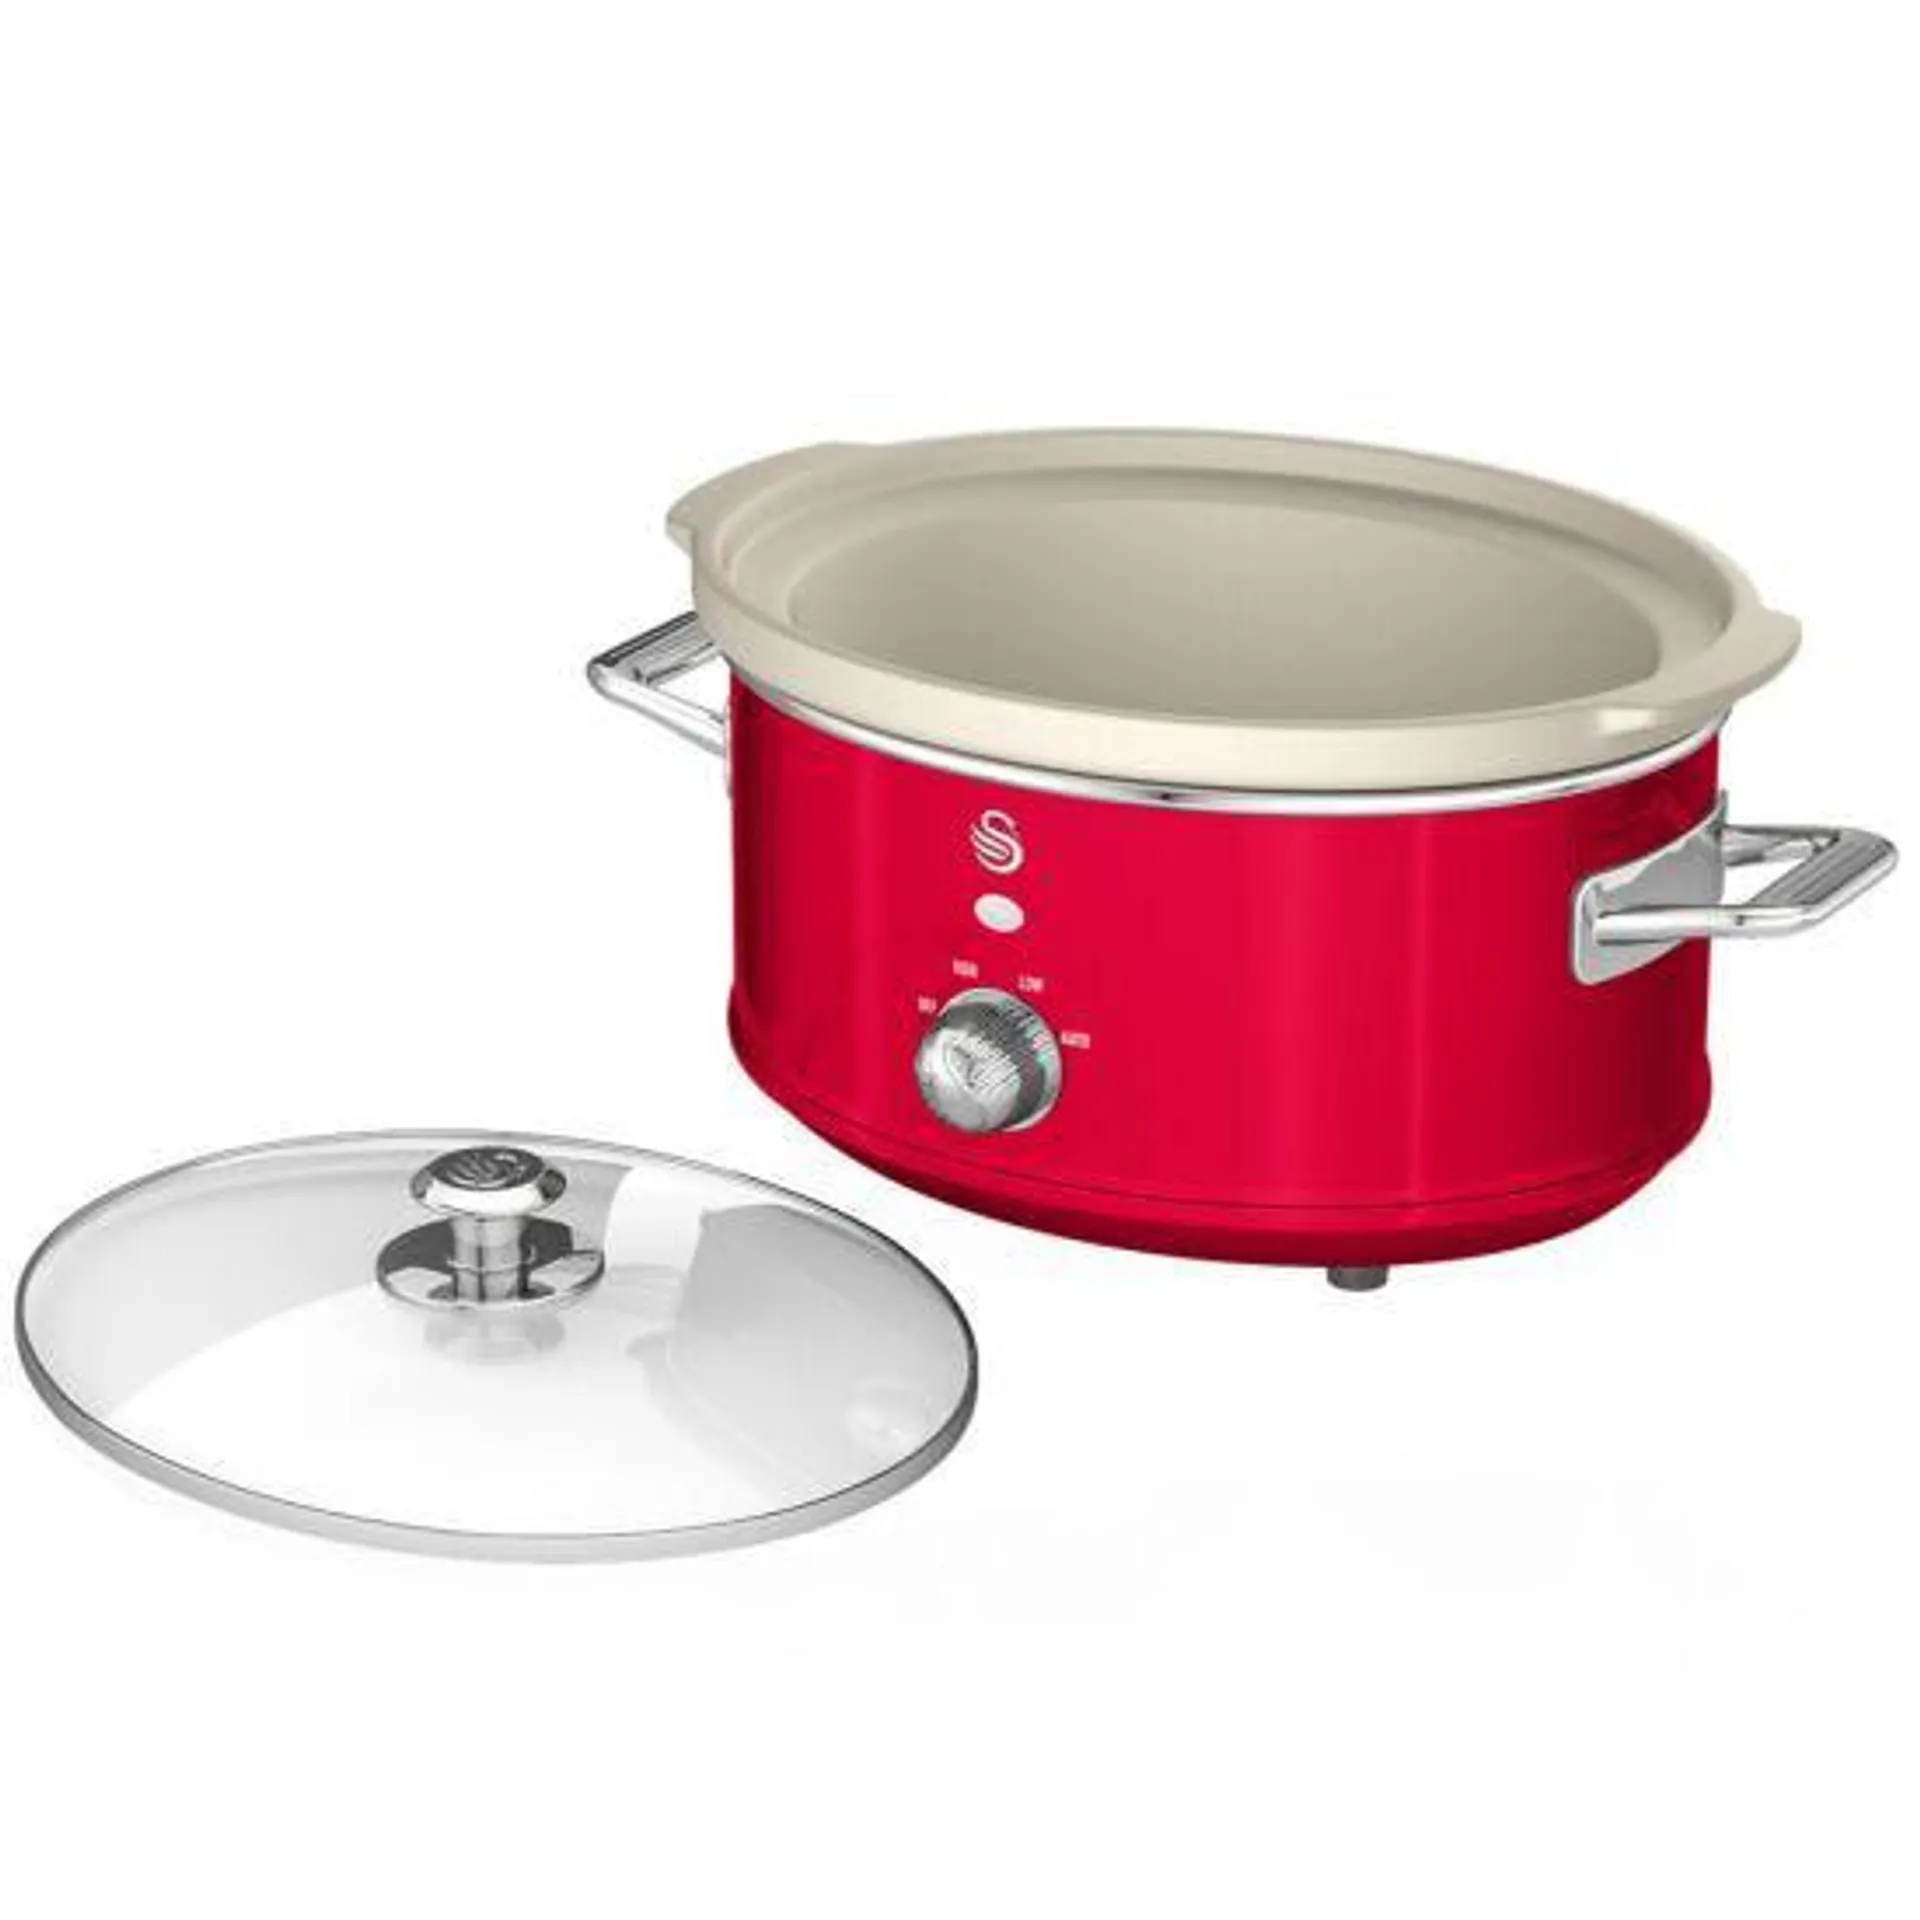 Swan SF17021RN 3.5L Retro Slow Cooker - Red